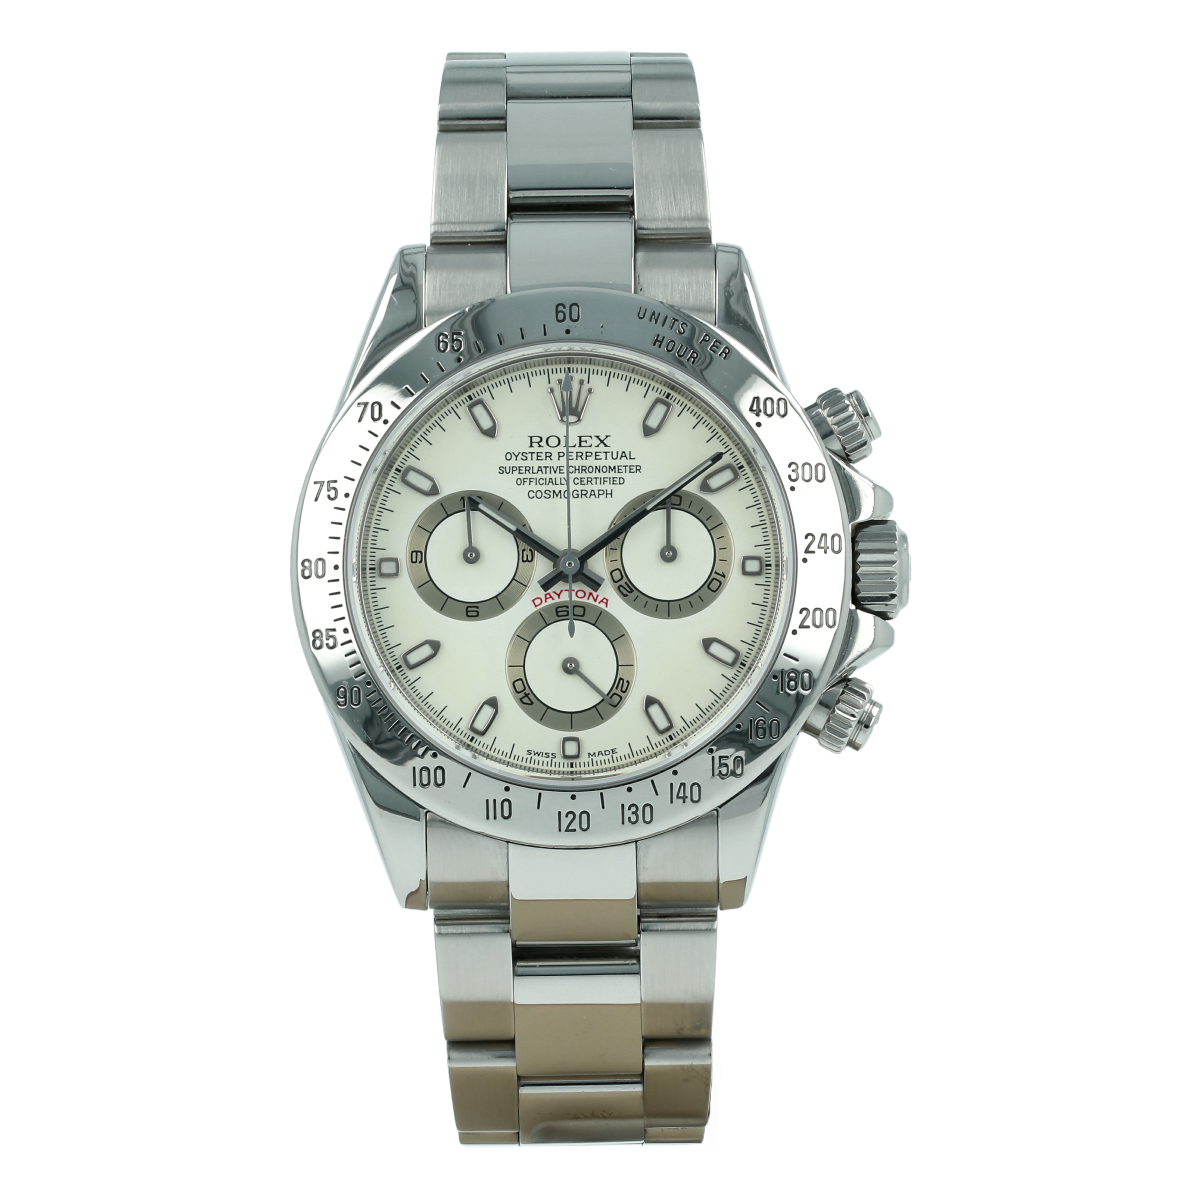 Rolex Cosmograph Daytona 116520 “Cream Dial (2001) | Buy pre-owned Rolex watch